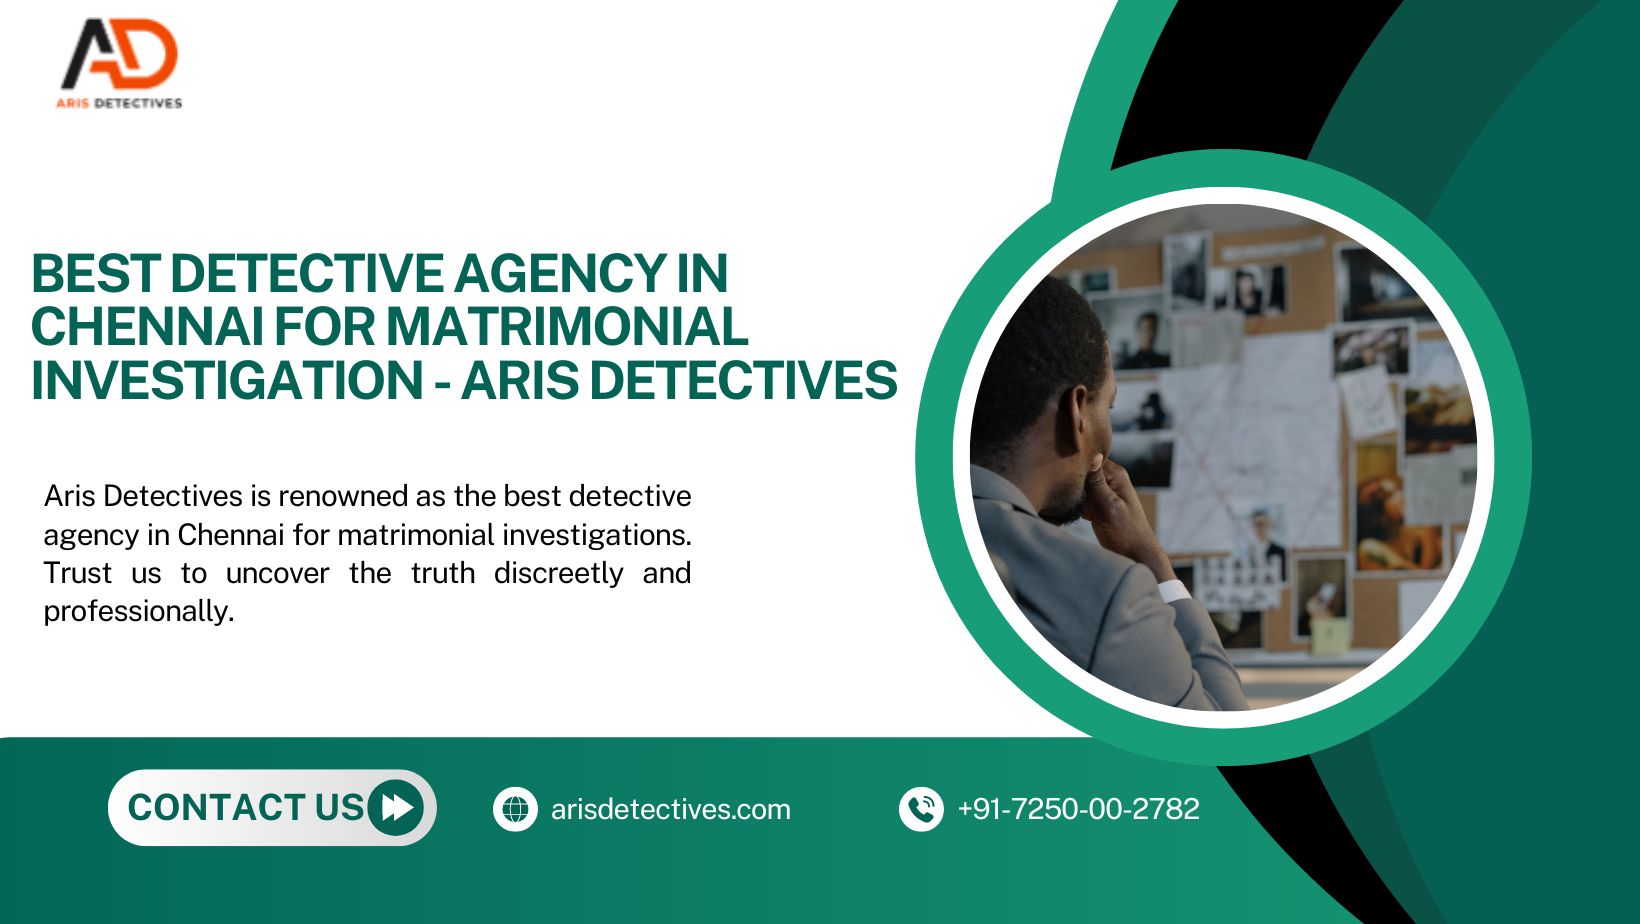 Best Detective Agency in Chennai for Matrimonial Investigation - Aris Detectives